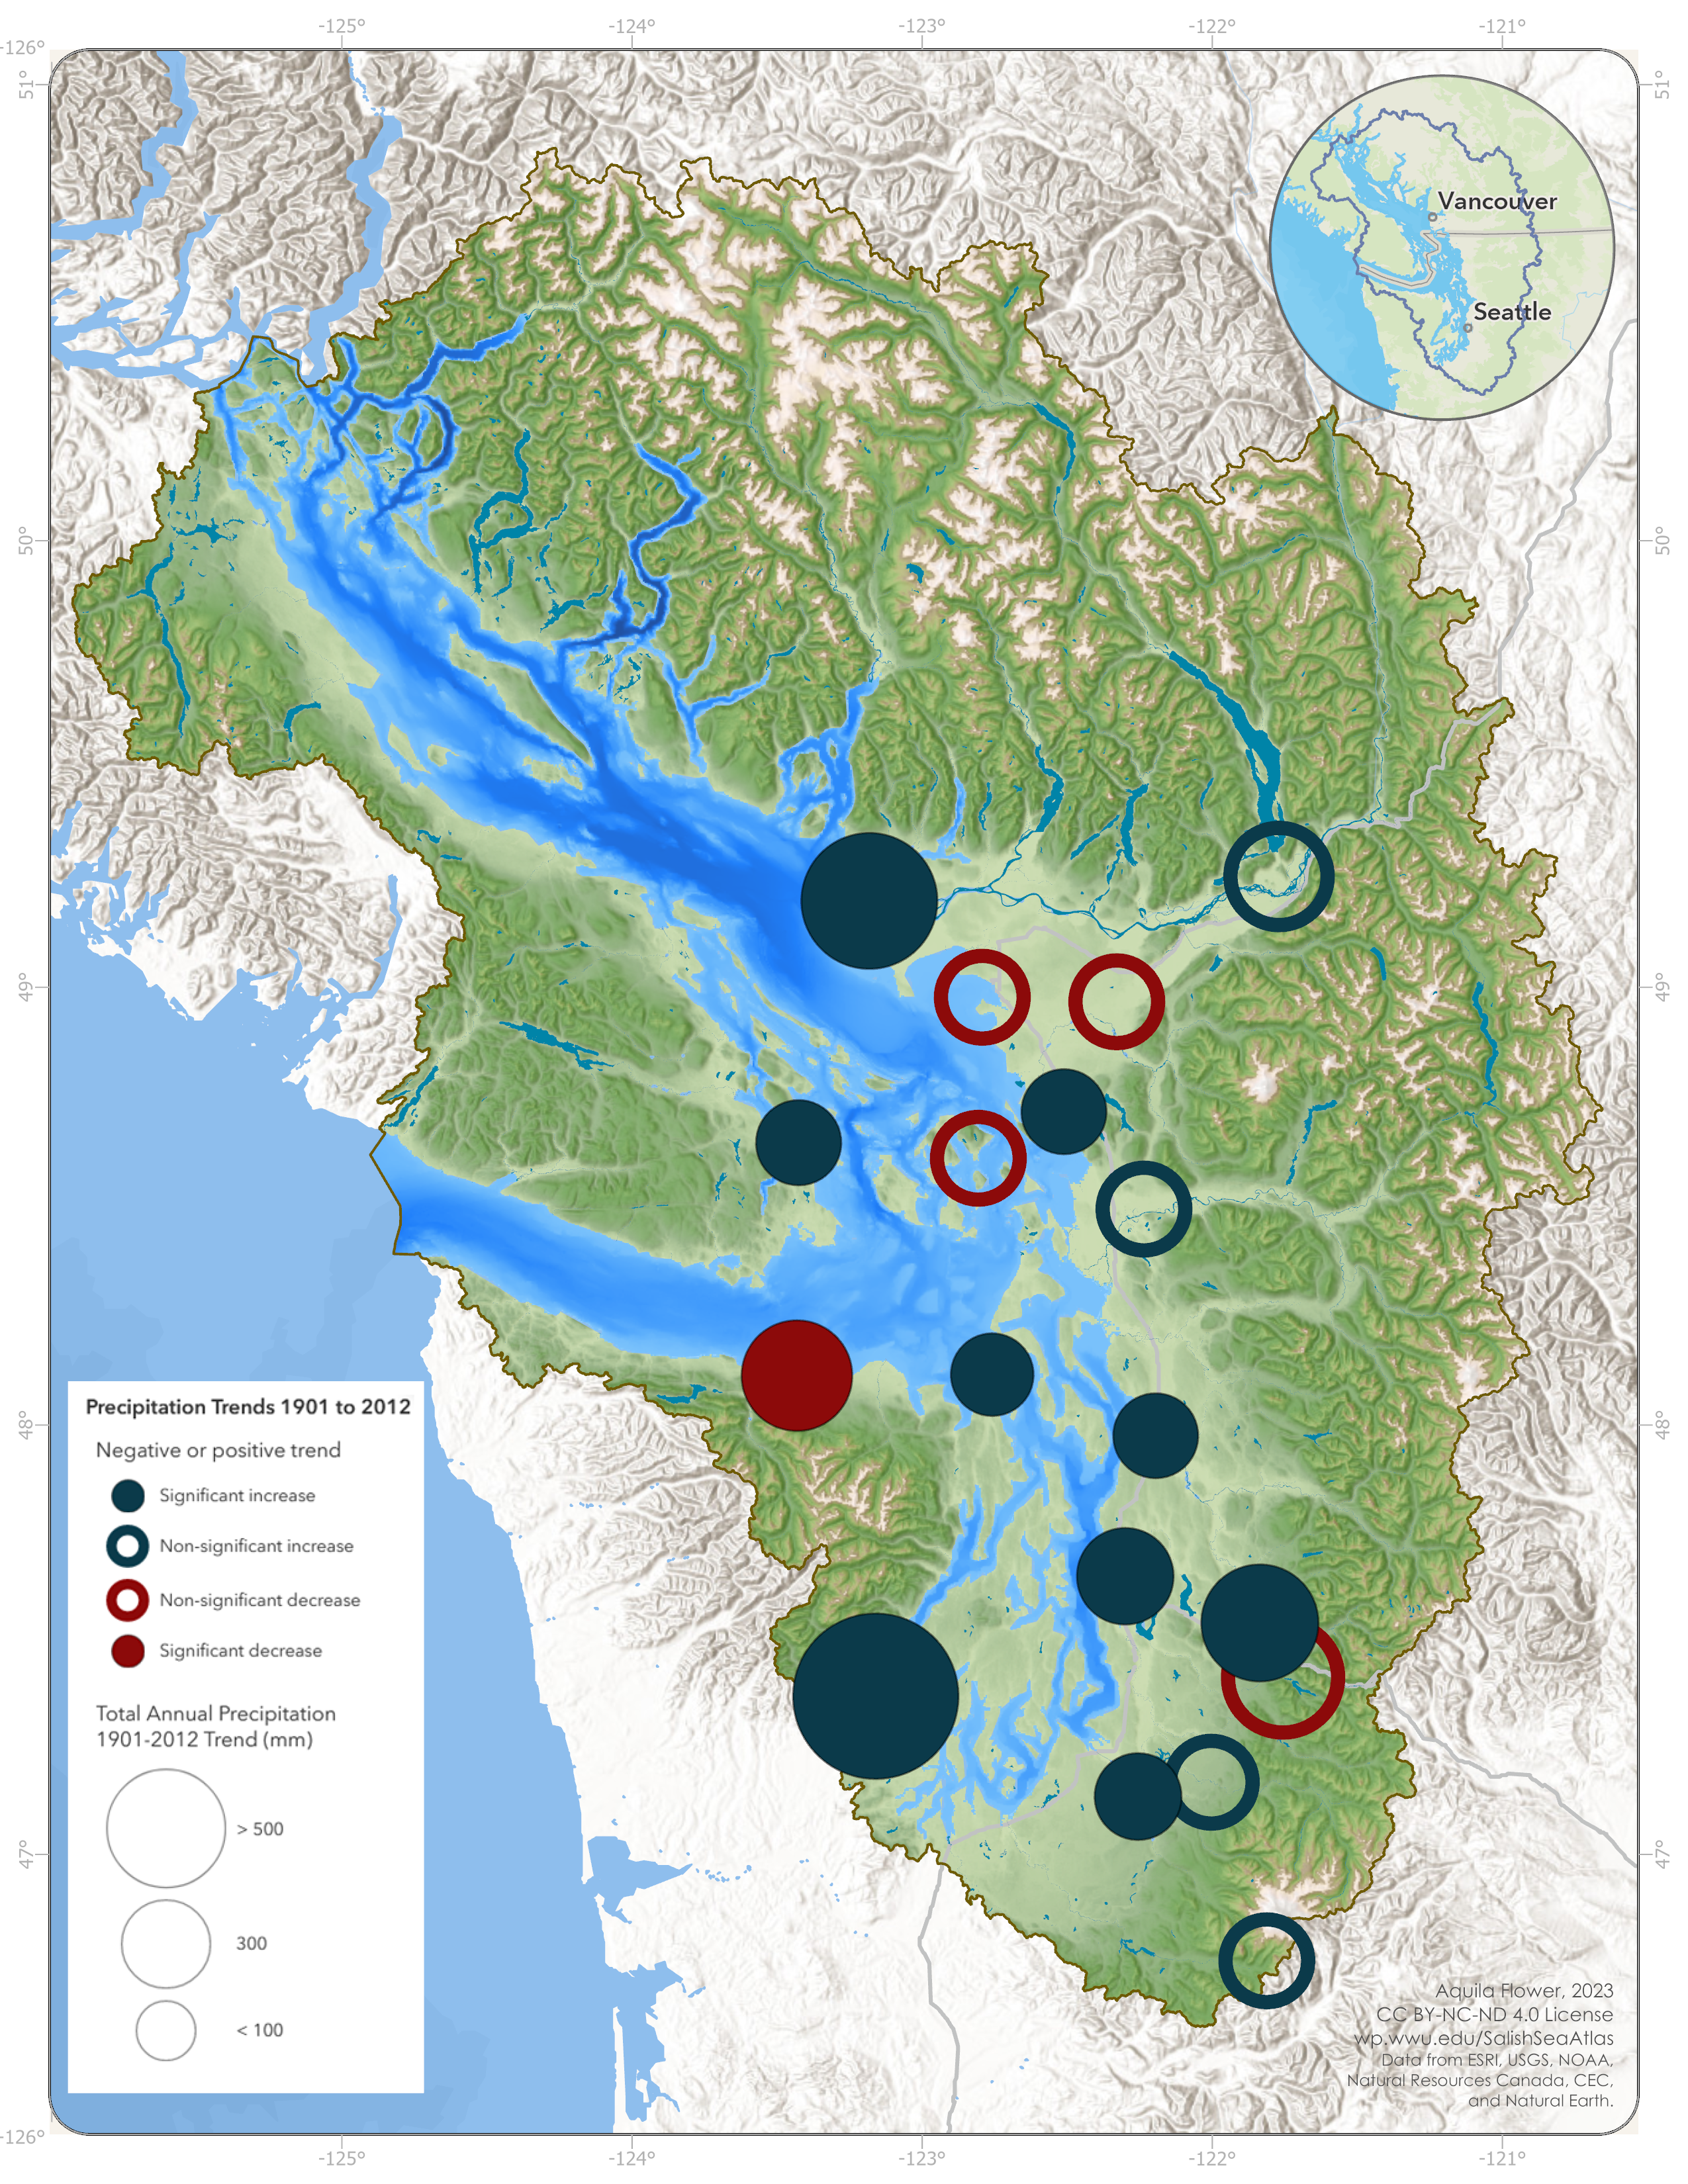 Precipitation trends in the Salish Sea watersheds, shown with graduated symbology.